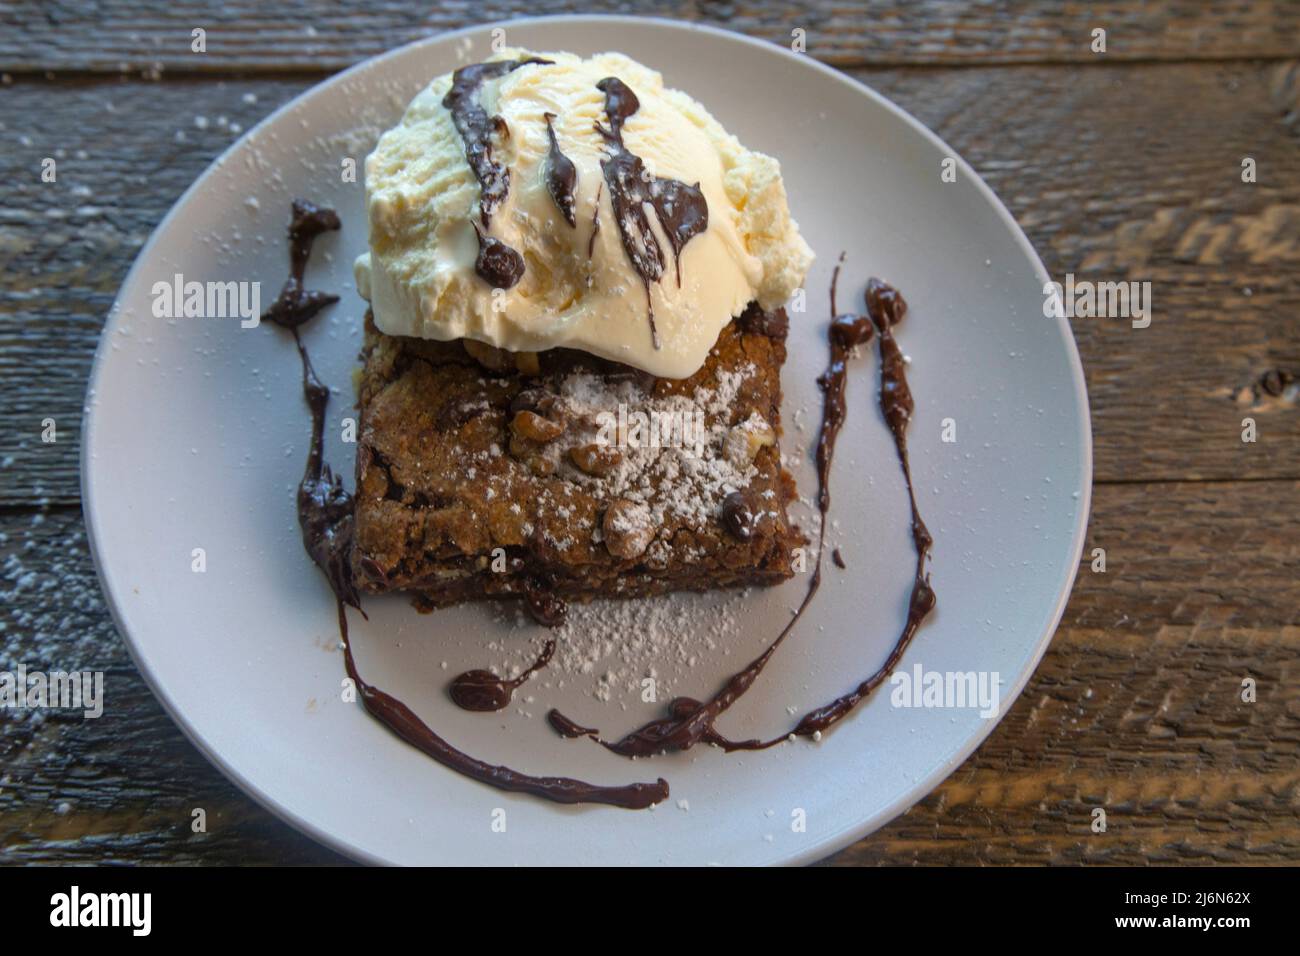 Top view of vanilla ice cream on a brownie on natural wood table. Stock Photo